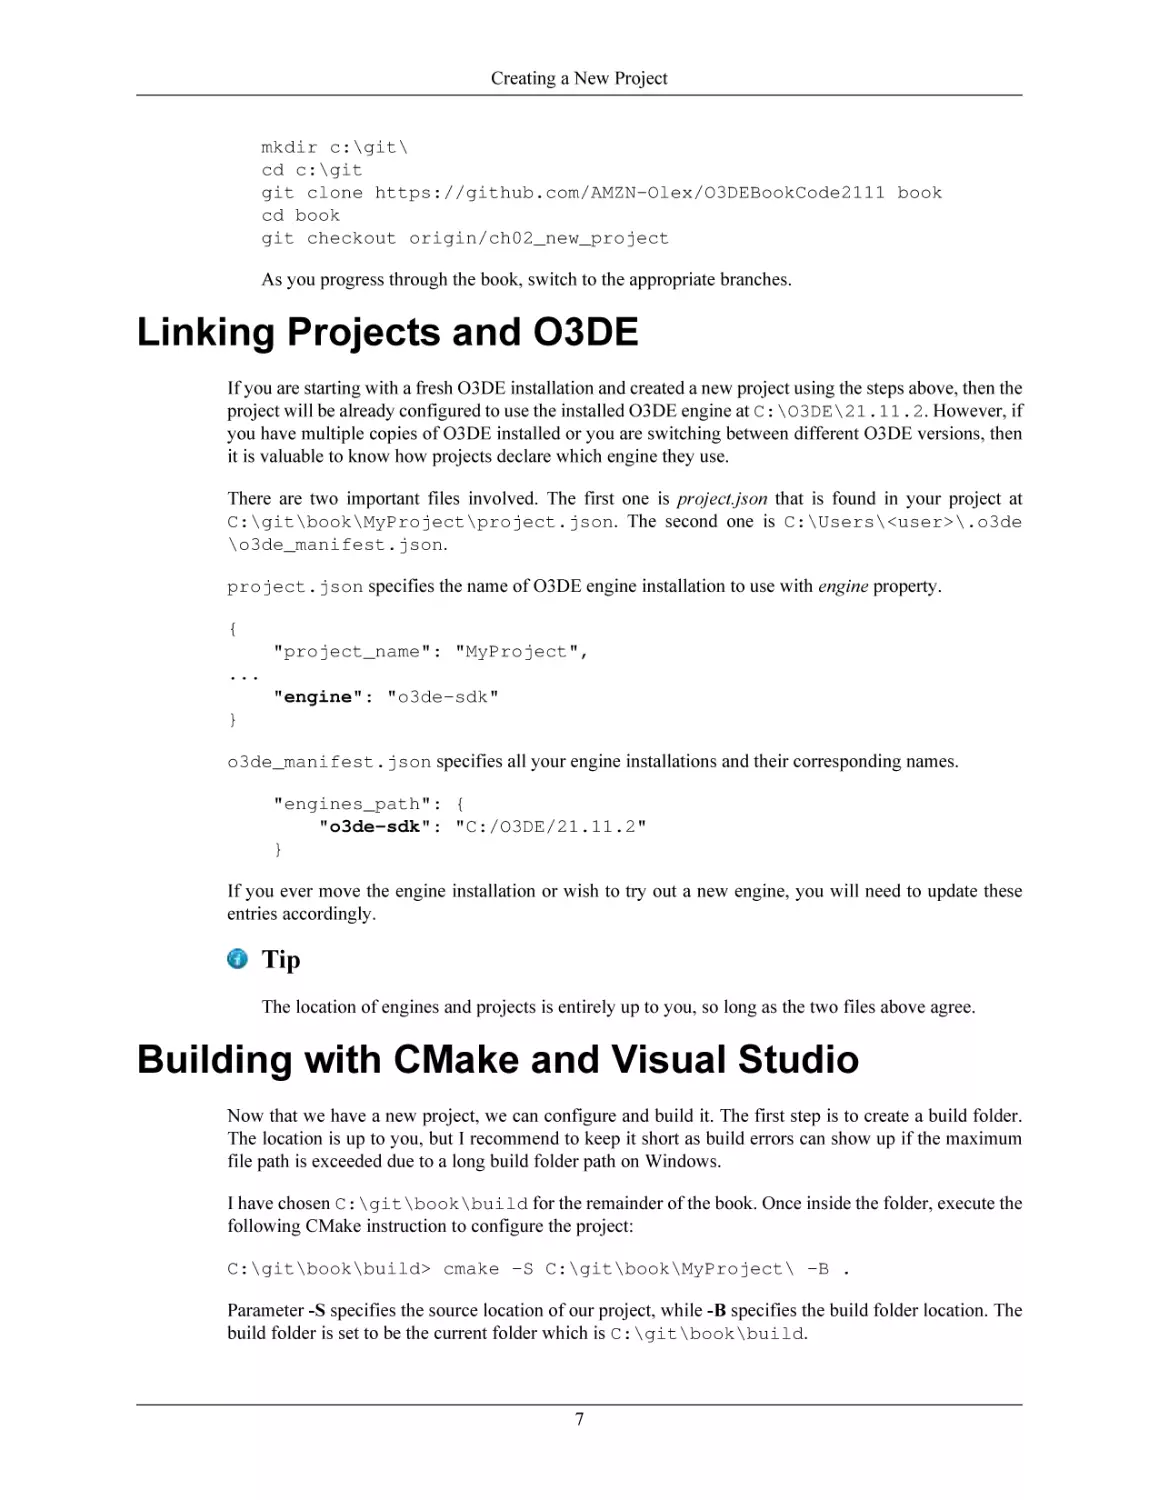 Linking Projects and O3DE
Building with CMake and Visual Studio